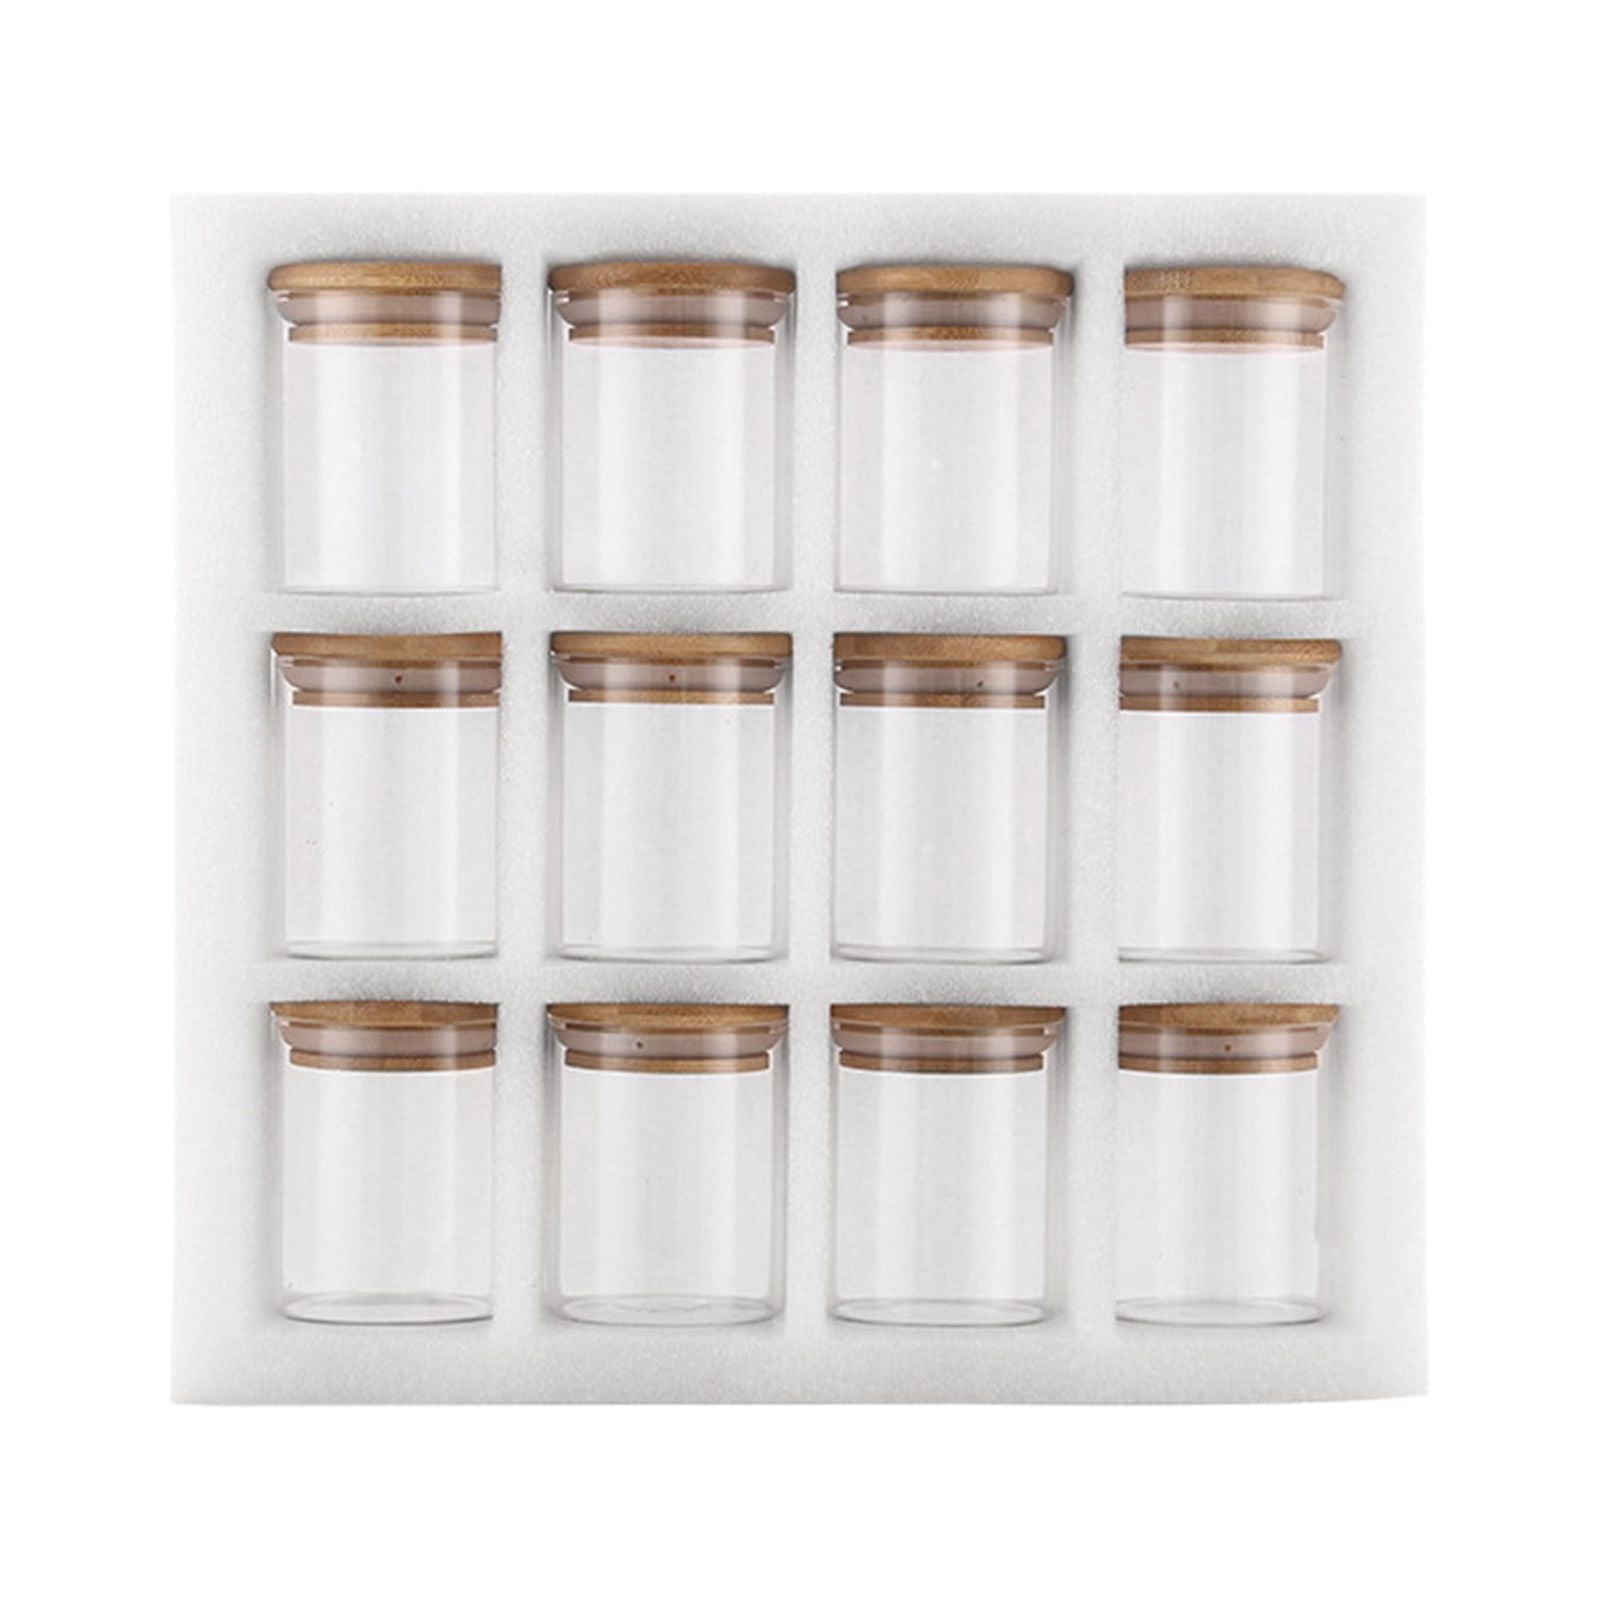 Glass Spice Jars with Bamboo Lids. 6oz Glass Jars with Lids. 12x